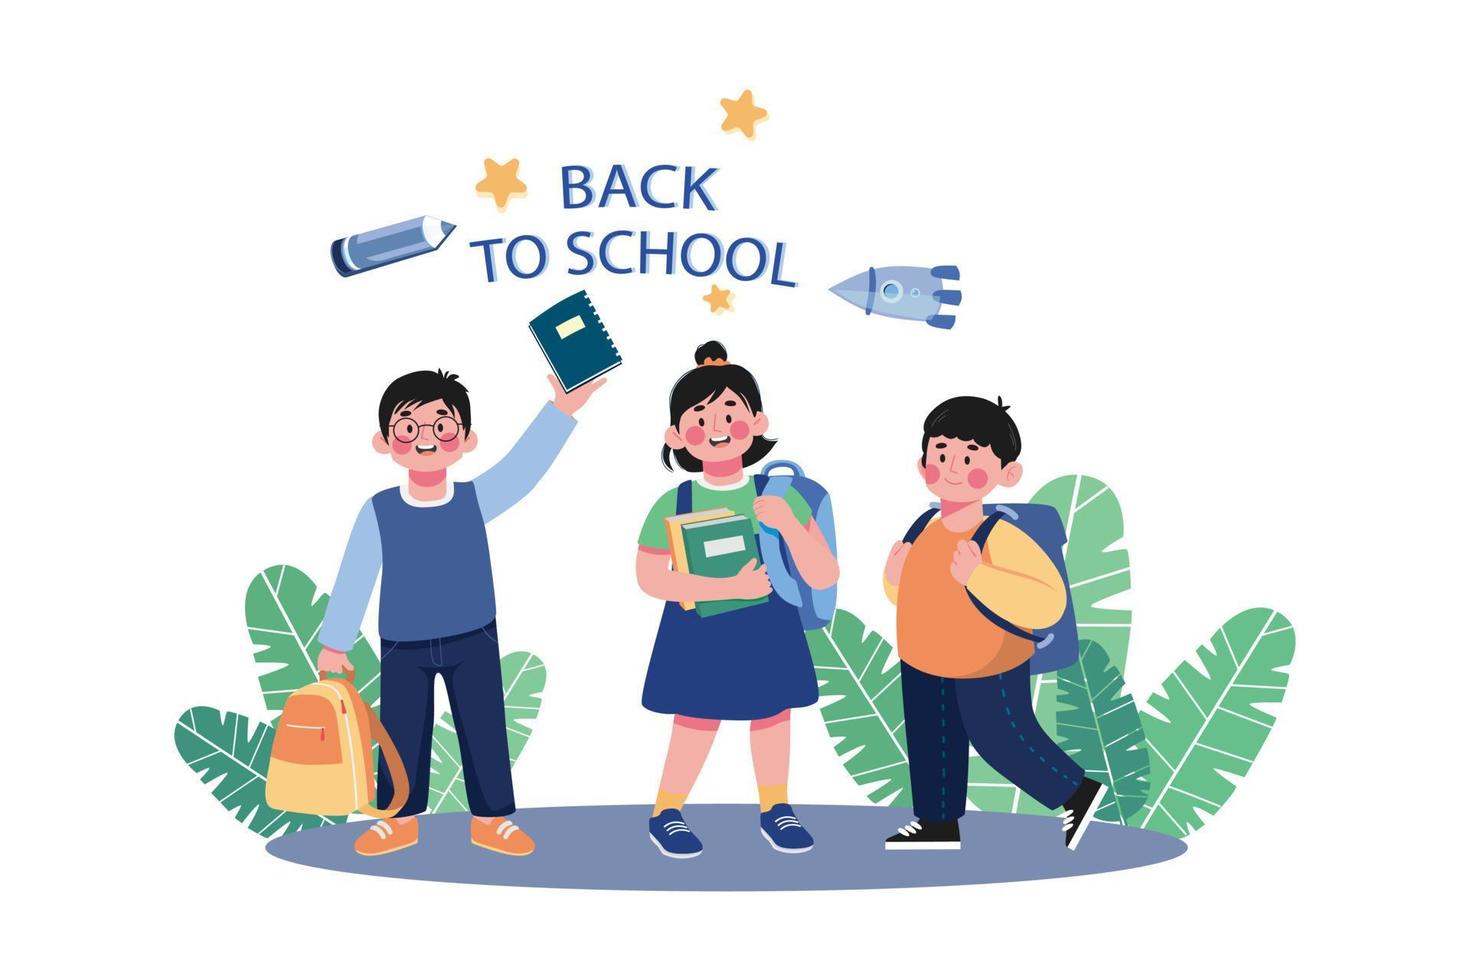 Children With Backpacks Are Ready To Go Back To School vector